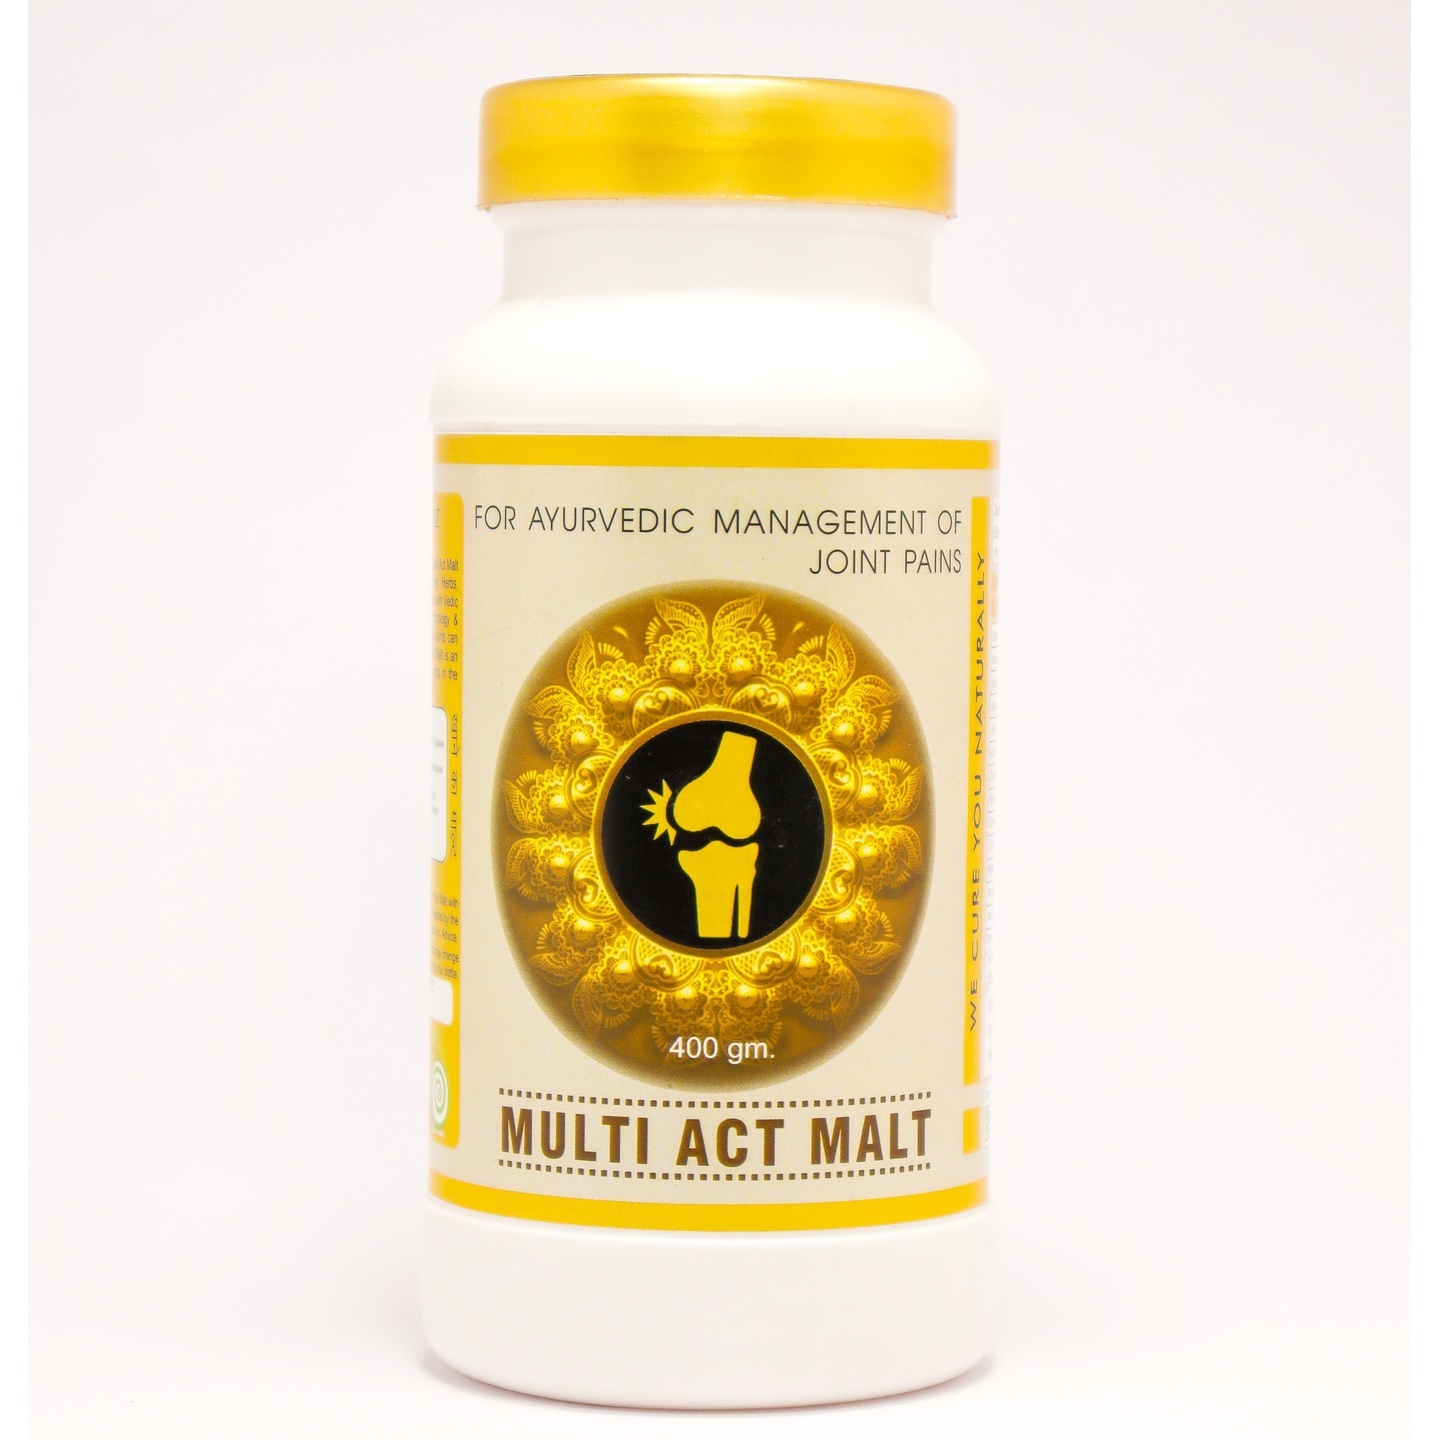 Multi Act Malt for Joint Pains 400 gm.